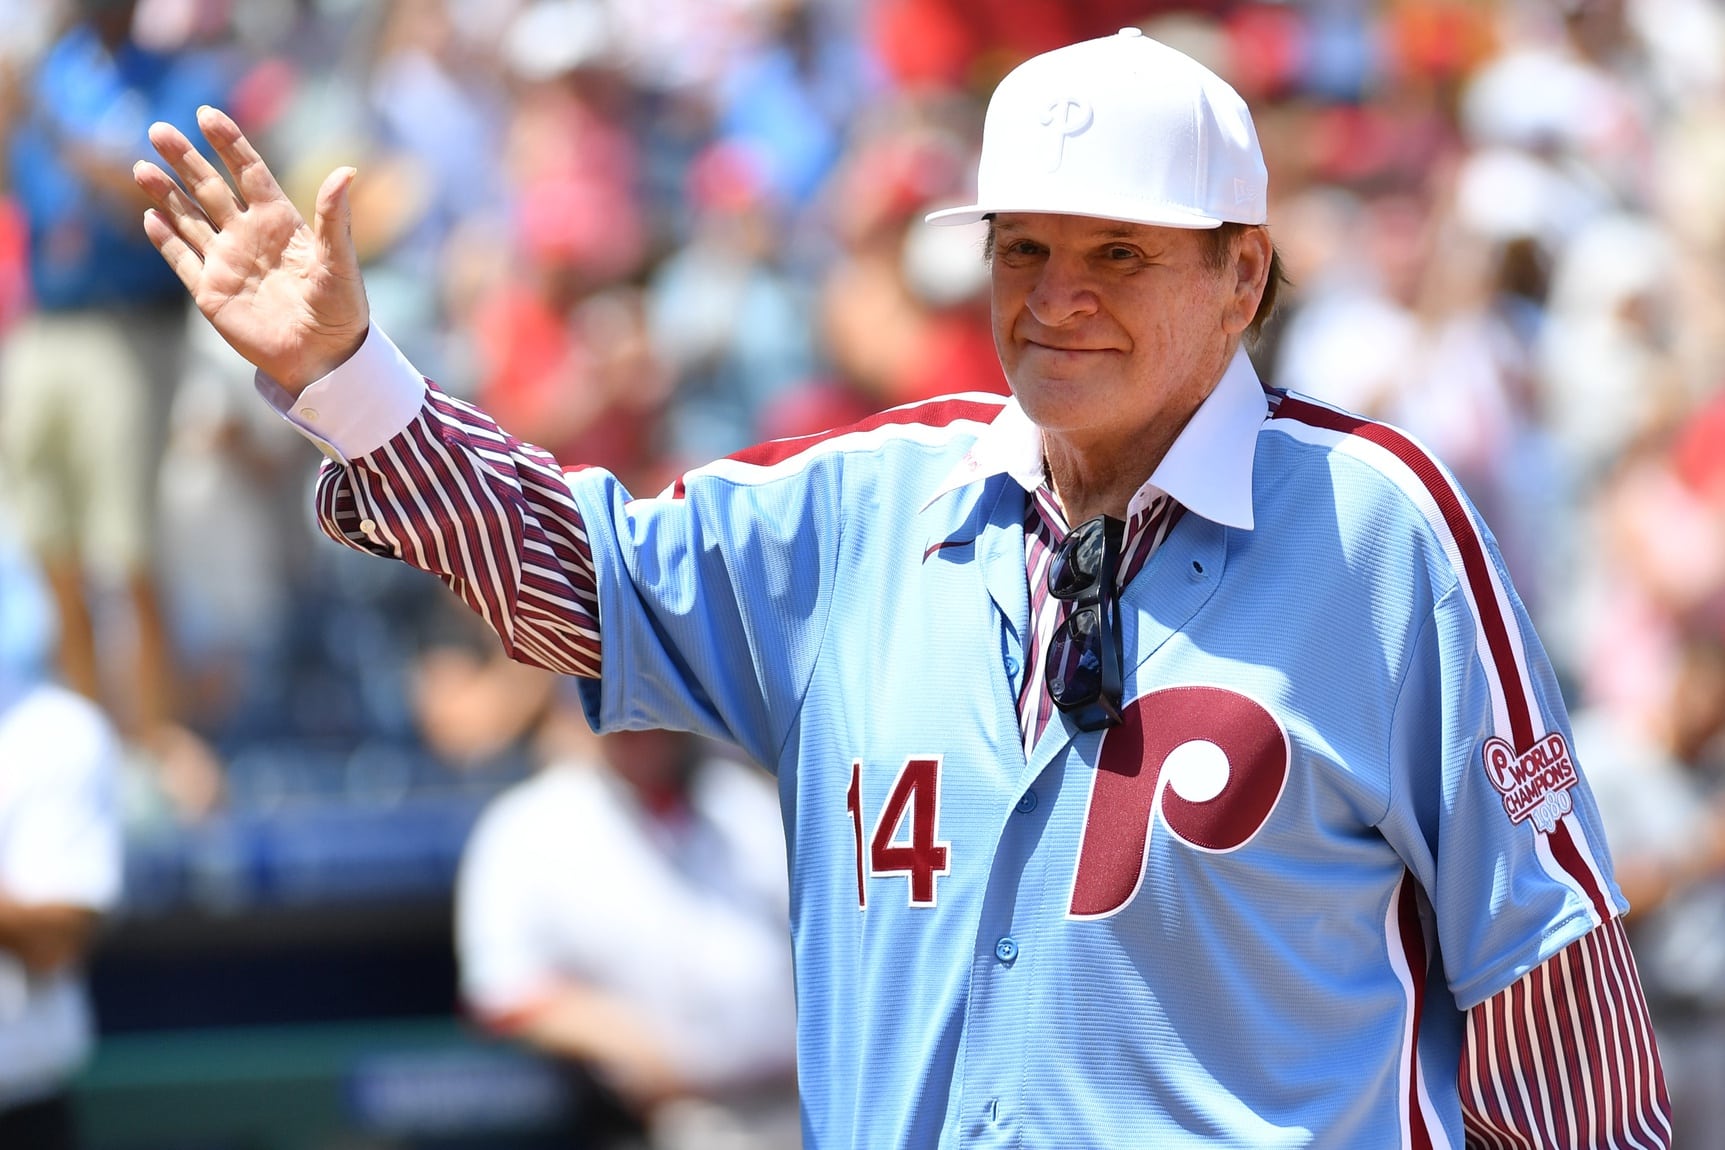 Curt Schilling Calls Pete Rose a “Bad Bad Guy with Literally Zero Morals or Scruples”